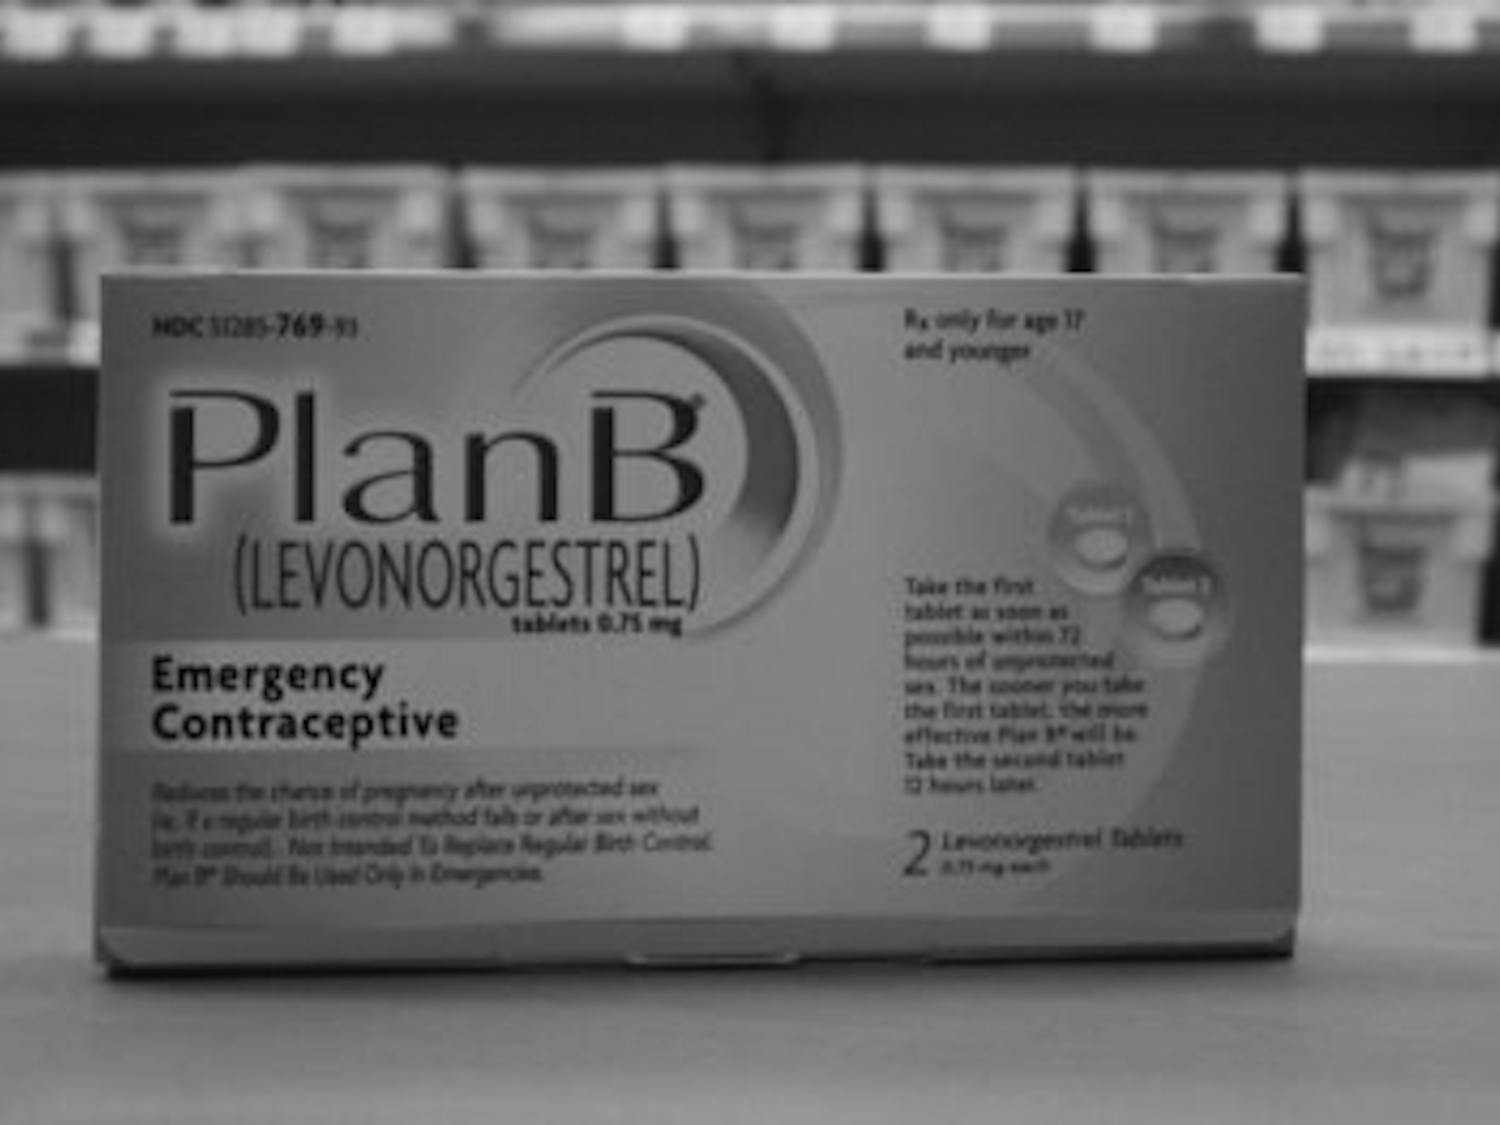 U.S. District Judge Edward Kornan ordered the FDA to make the Plan B morning after pill available over-the-counter for 17-year-old girls.